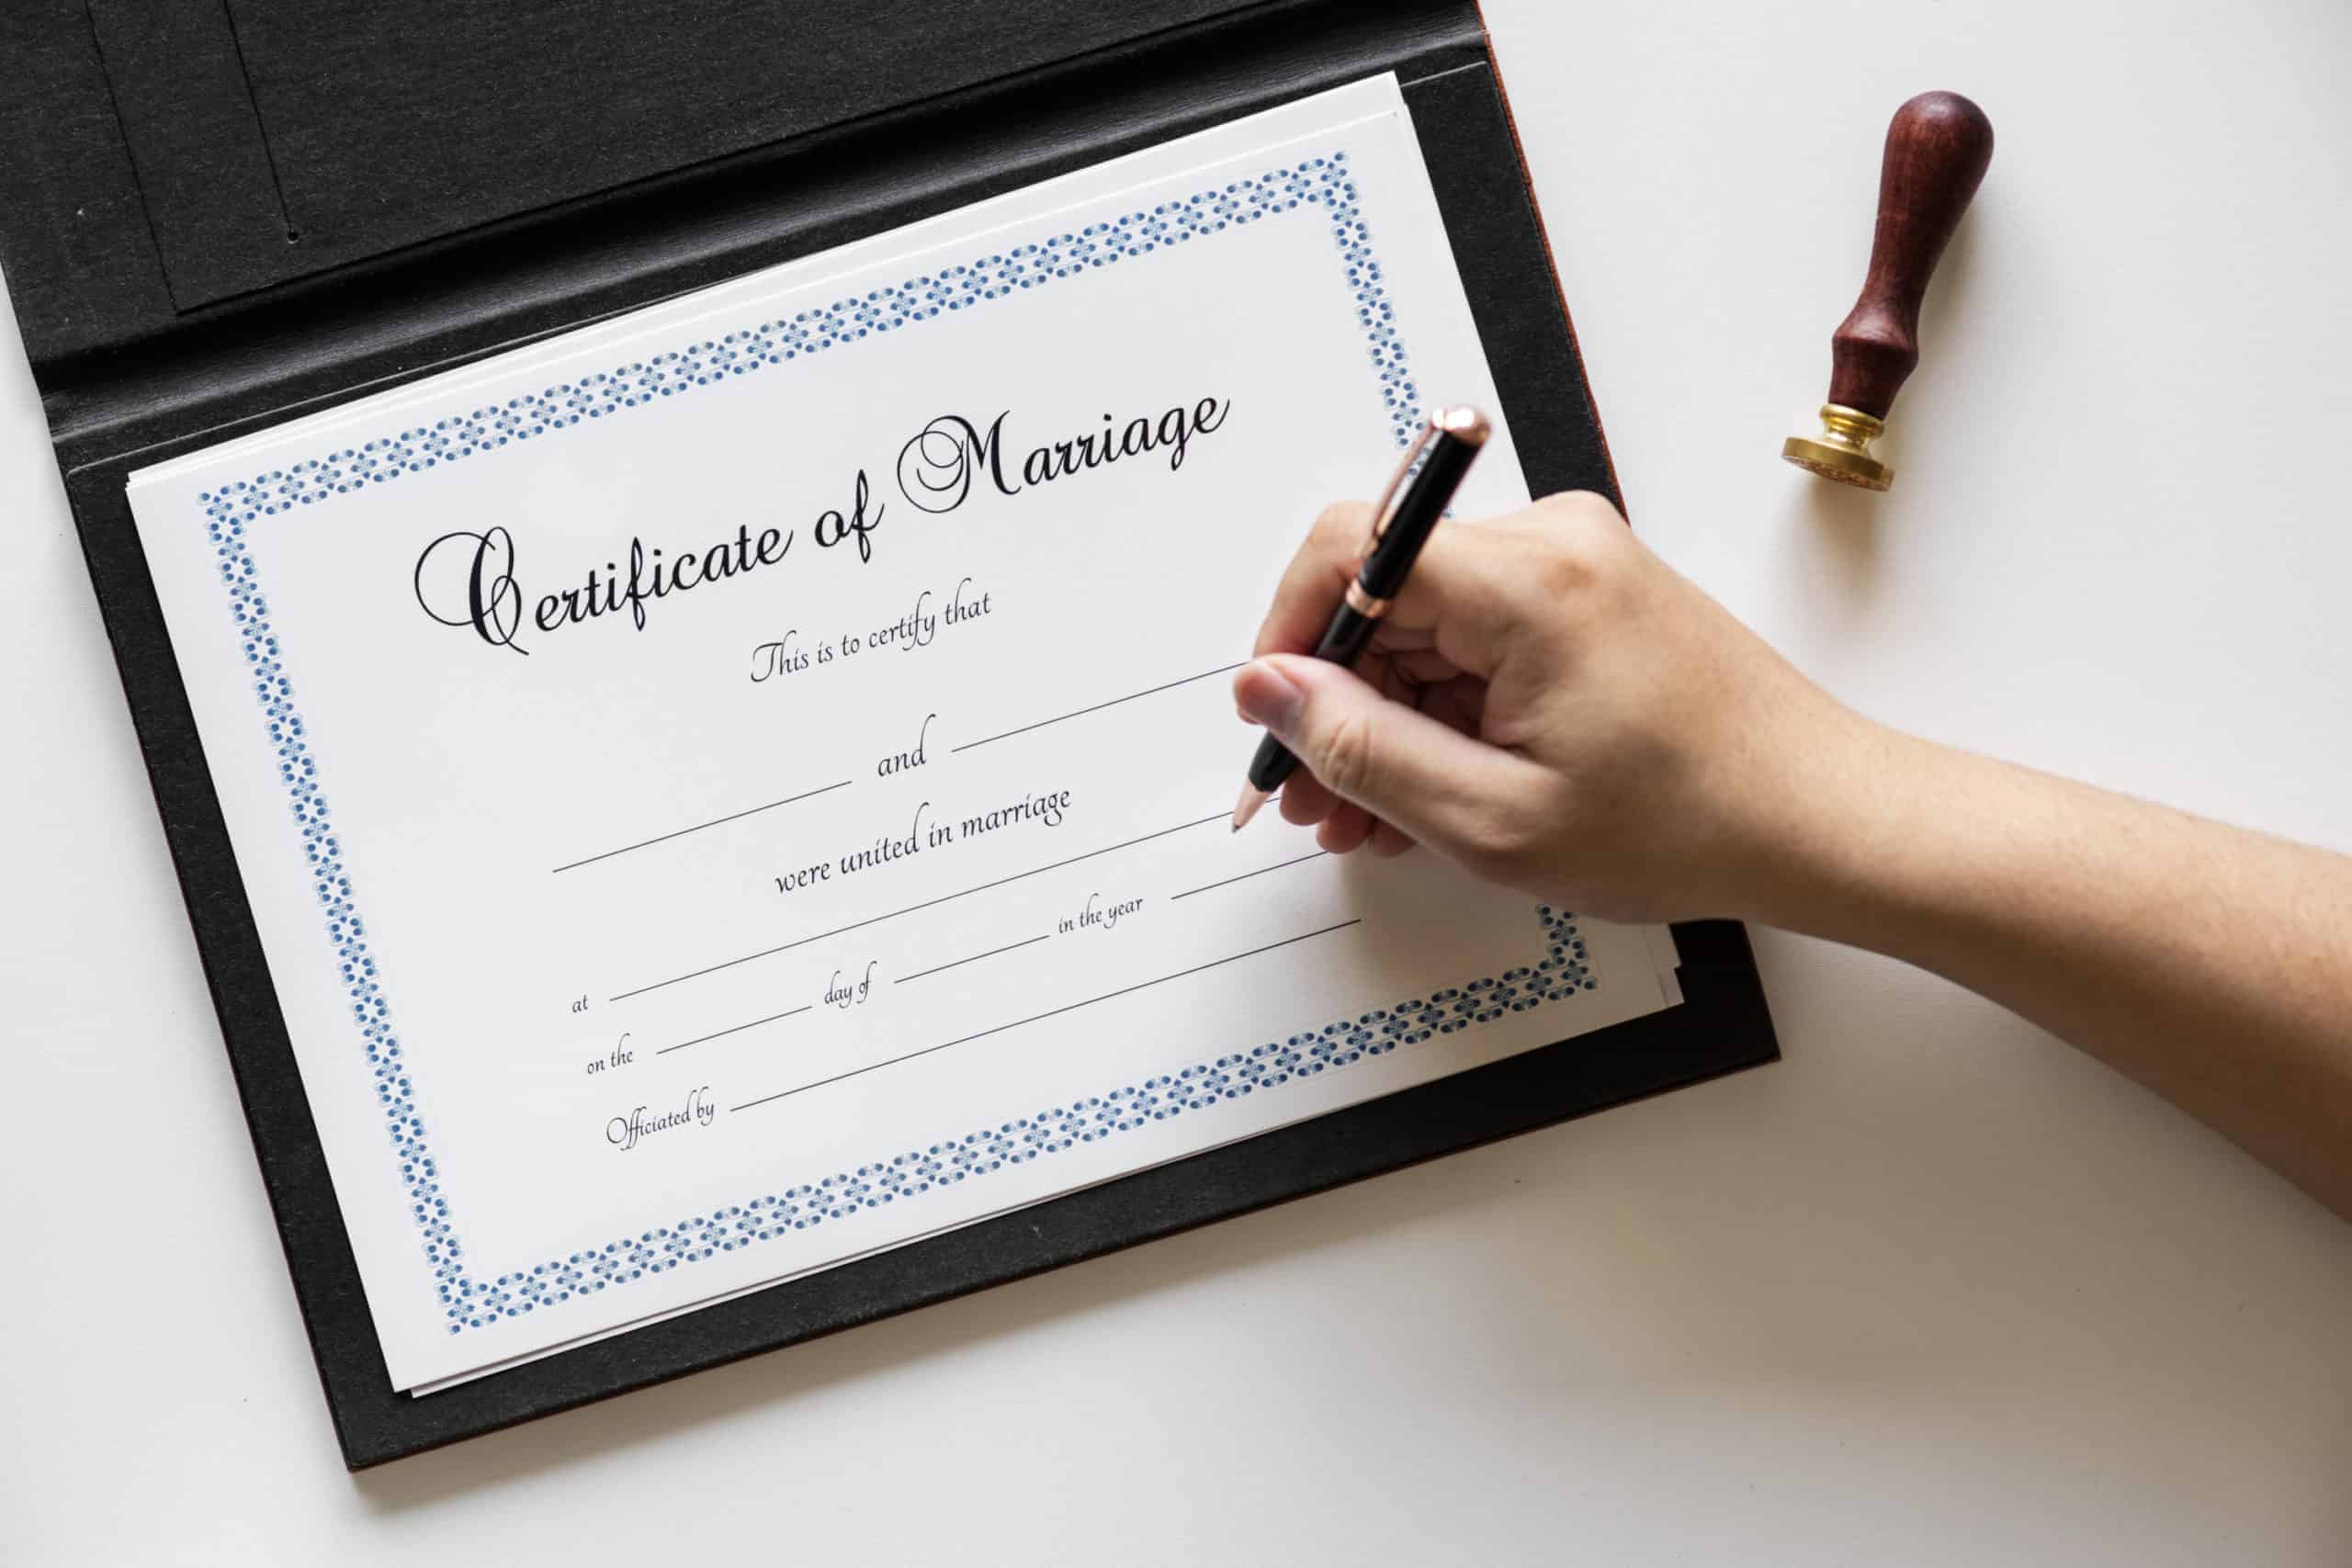 How to Get a Marriage Certificate - Marriage Name Change